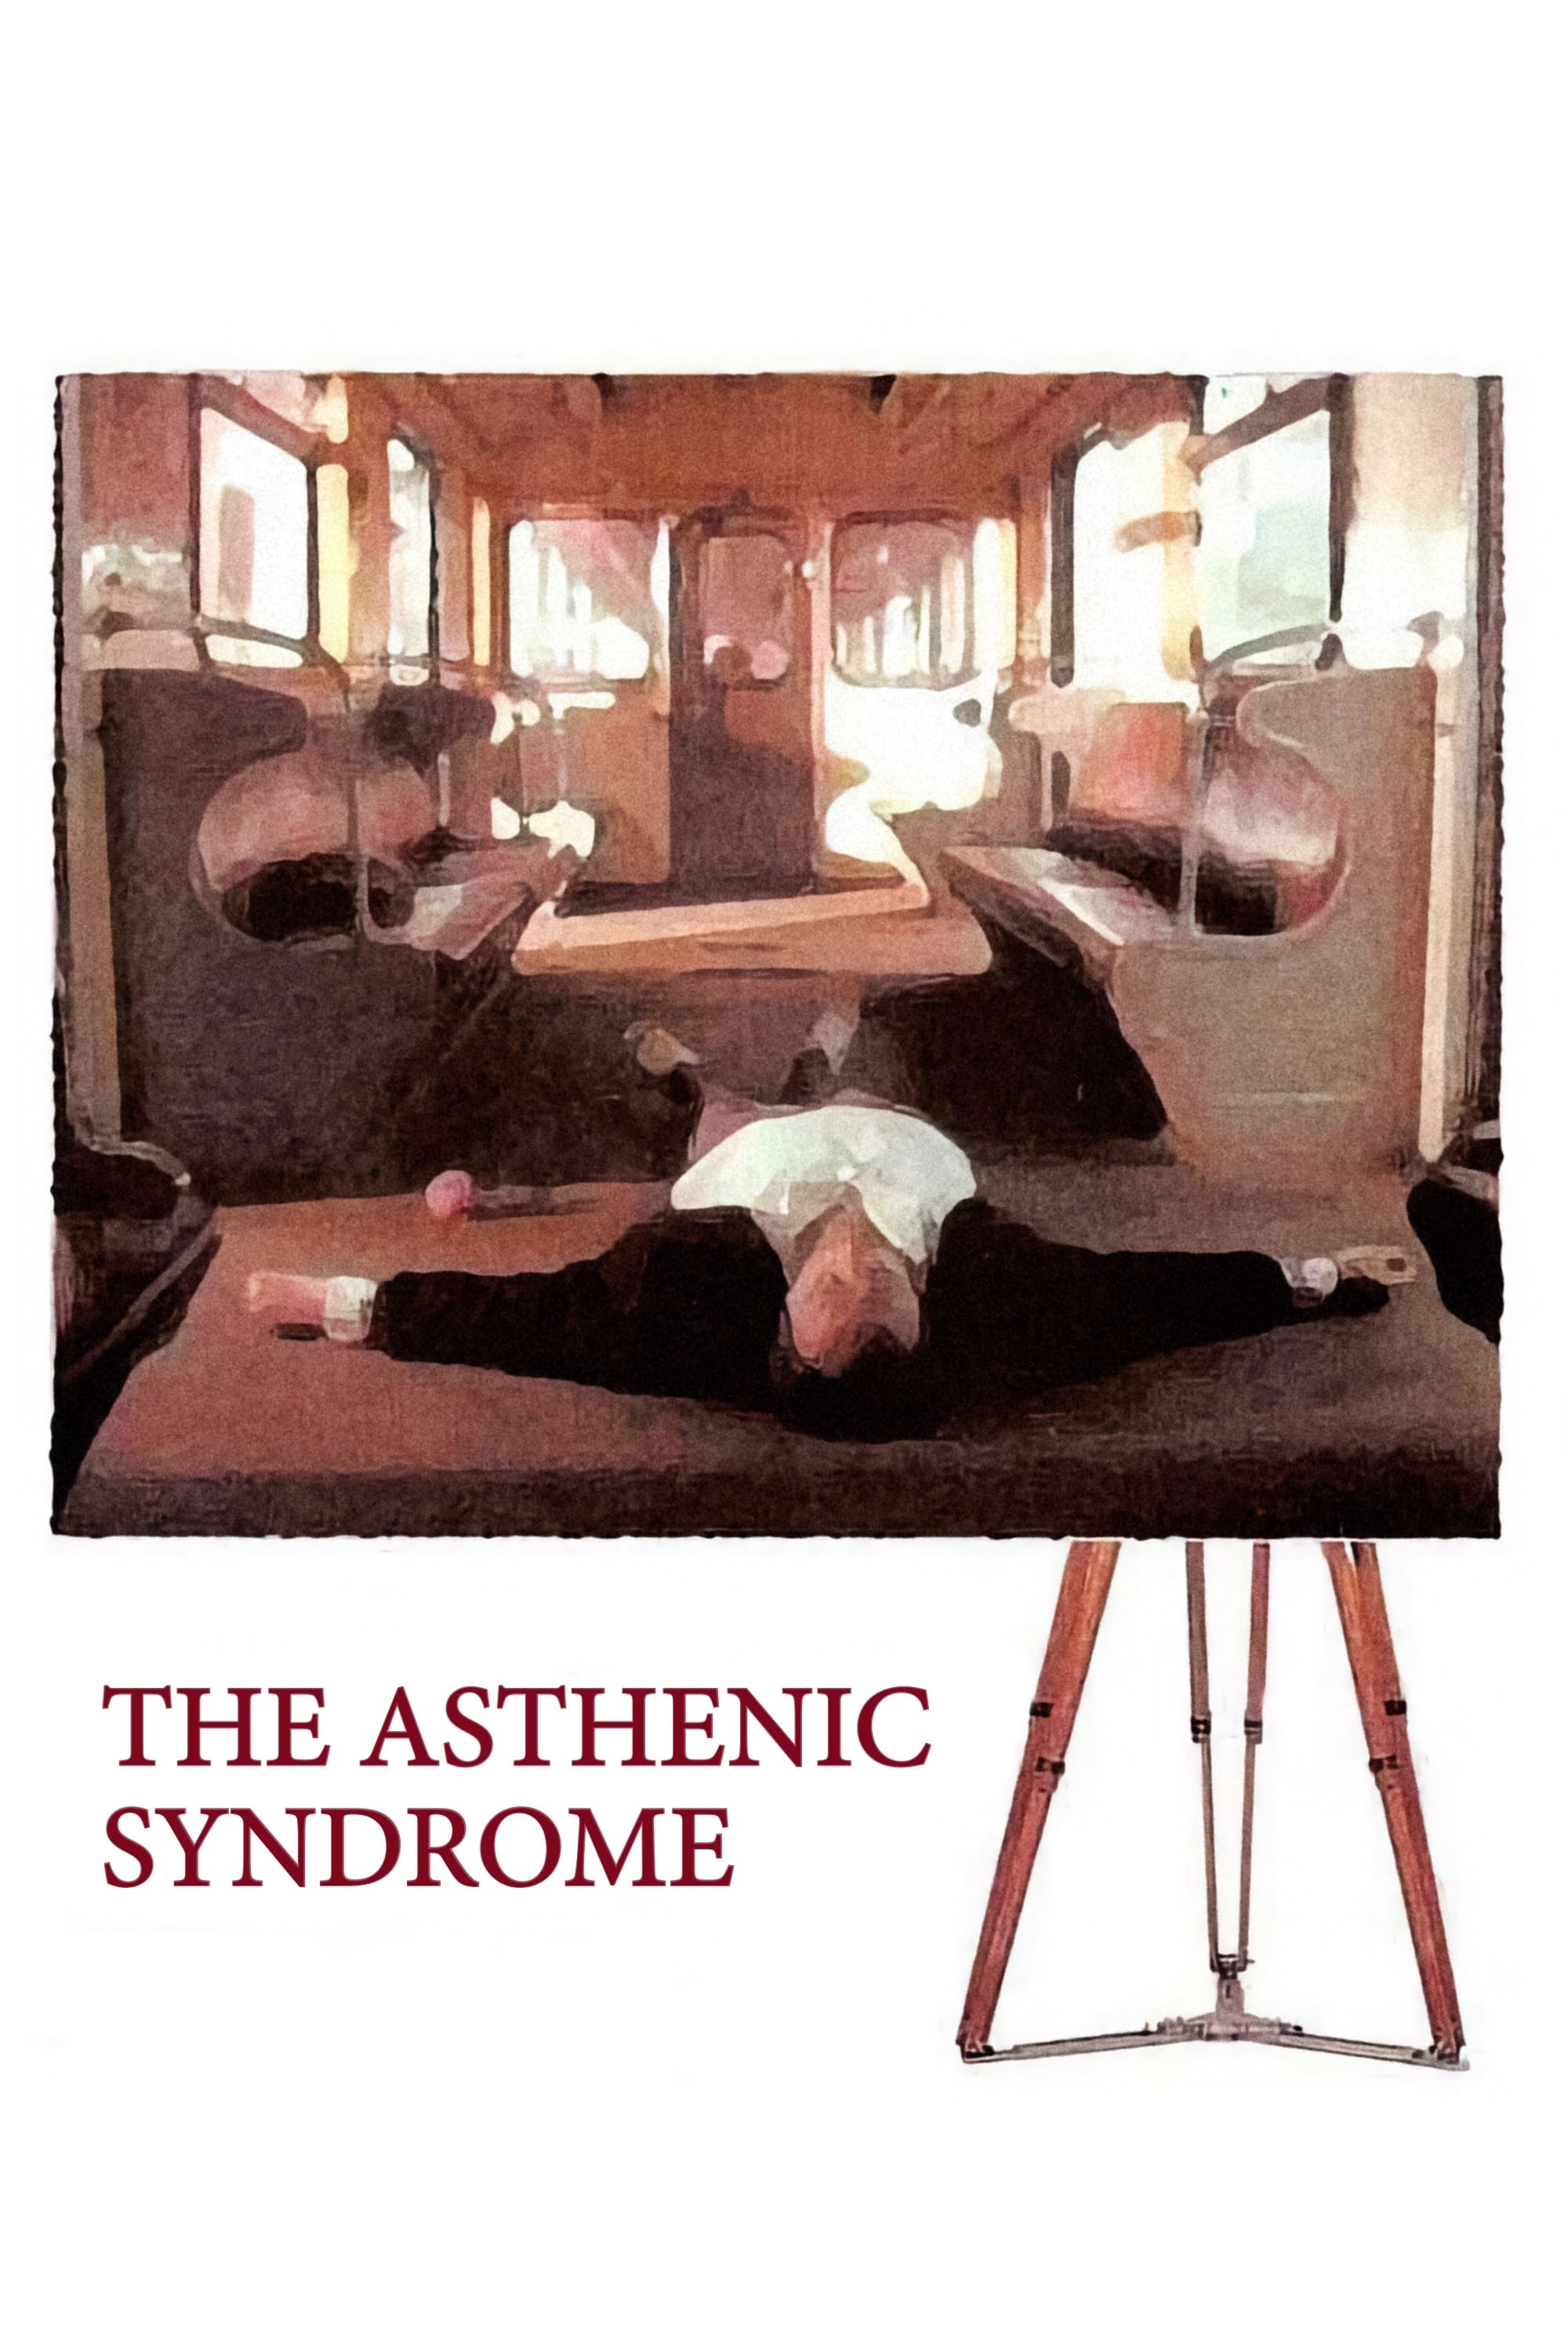 The Asthenic Syndrome (1989)